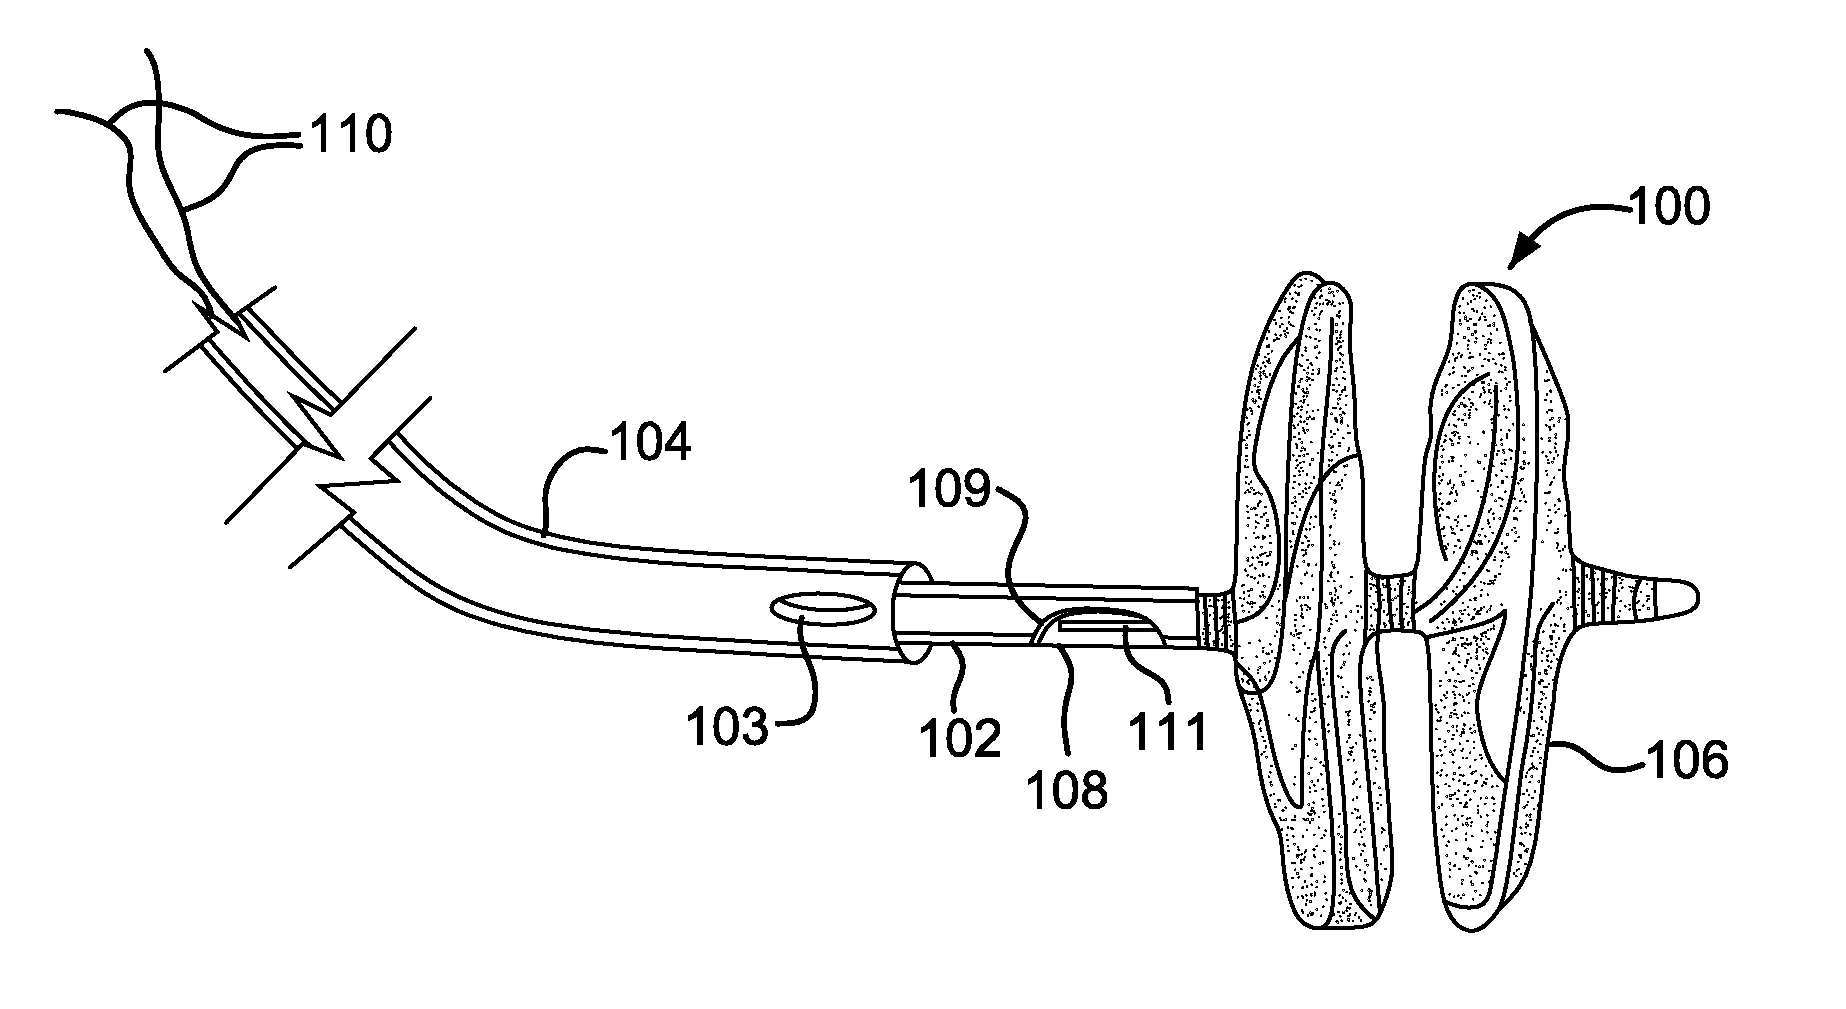 Sealing Device and Delivery System